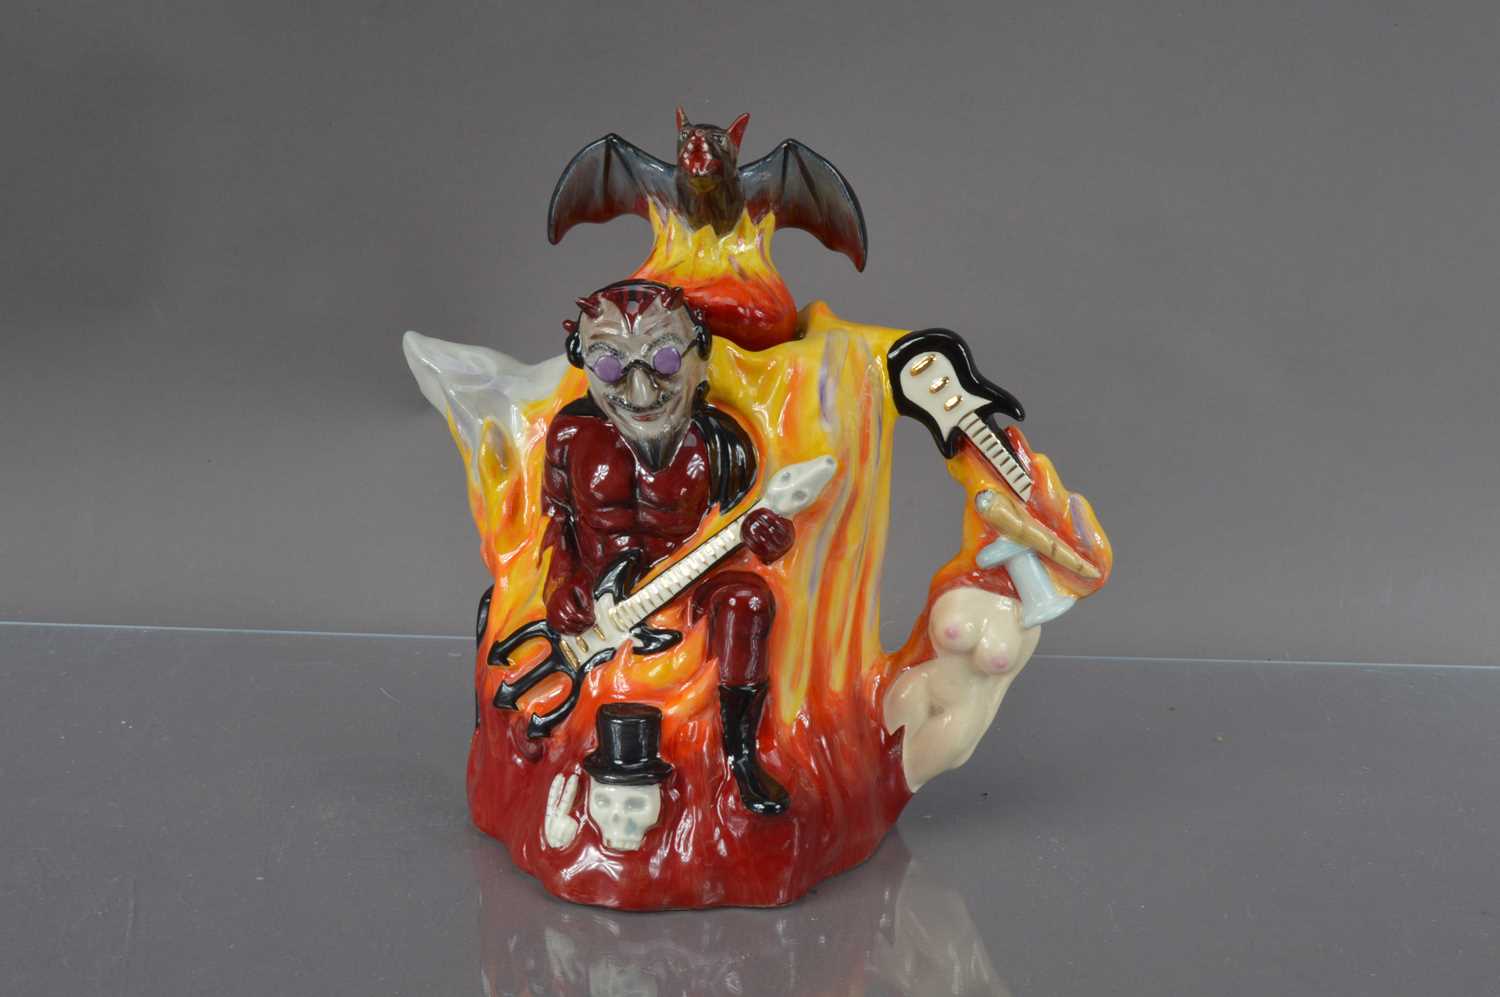 Lot 400 - A novelty "Bat Out of Hell" pottery teapot designed by Vince McDonald for 'Totally Teapots' of Stoke-On-Trent